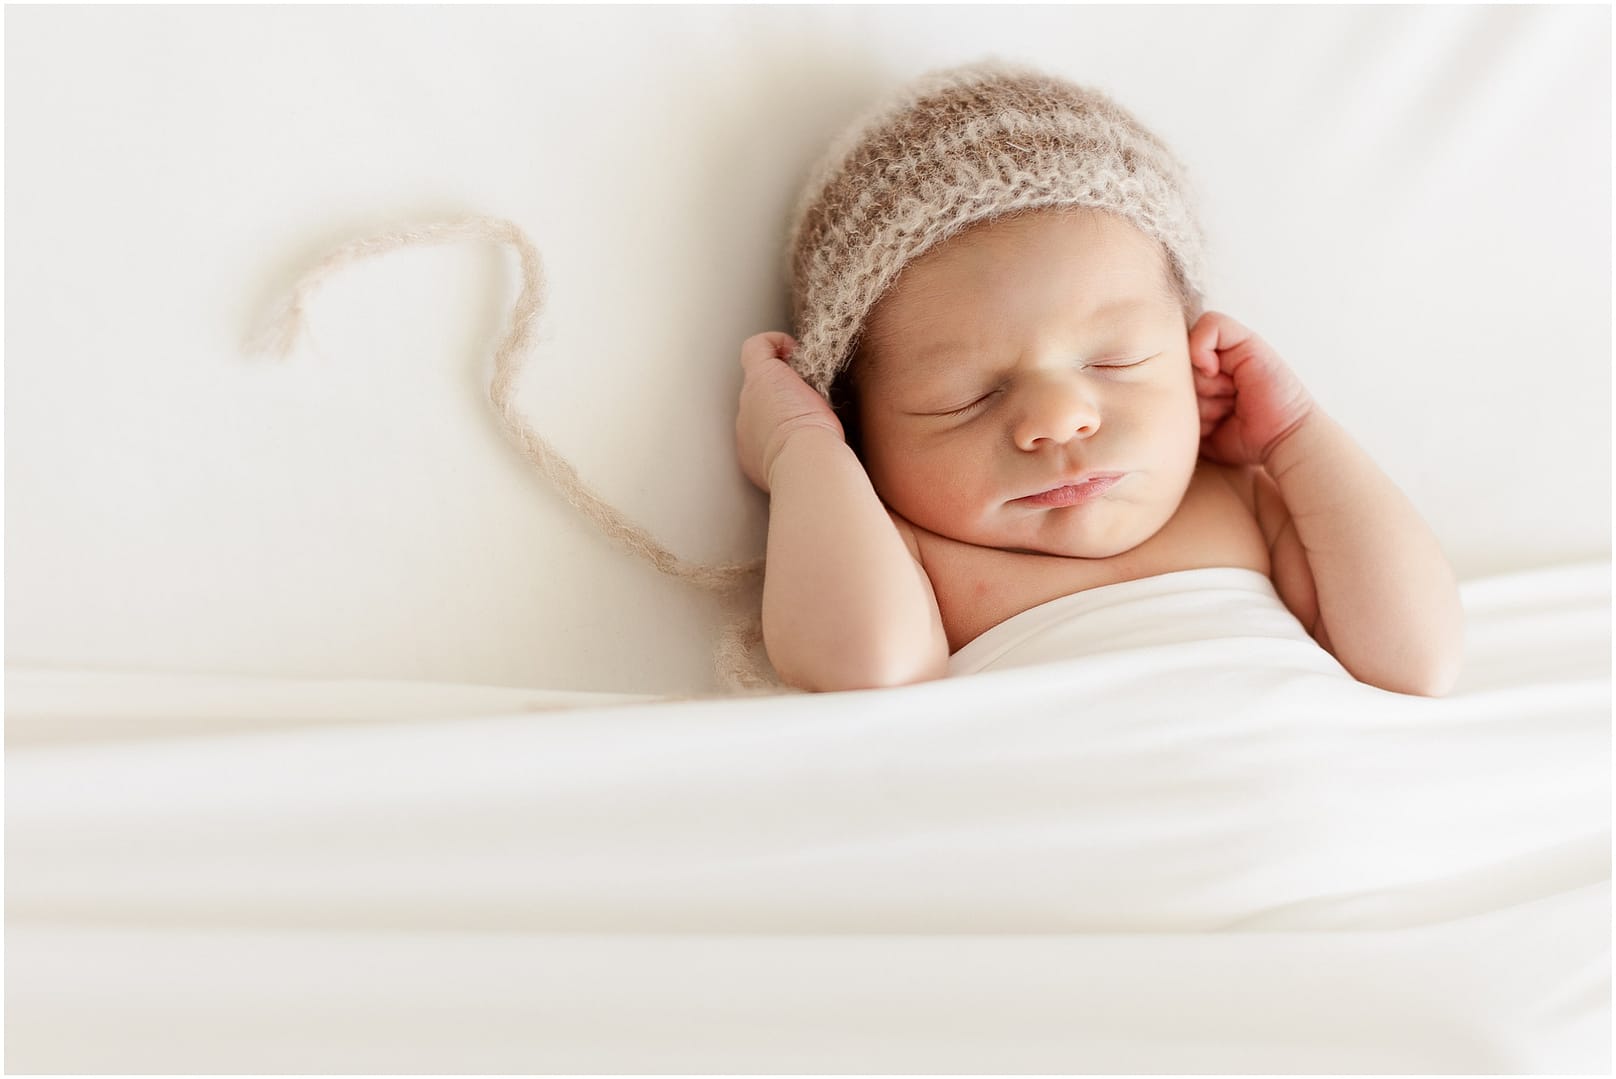 Baby boy in bonnet during Boise newborn studio session. Photo by Tiffany Hix Photography.